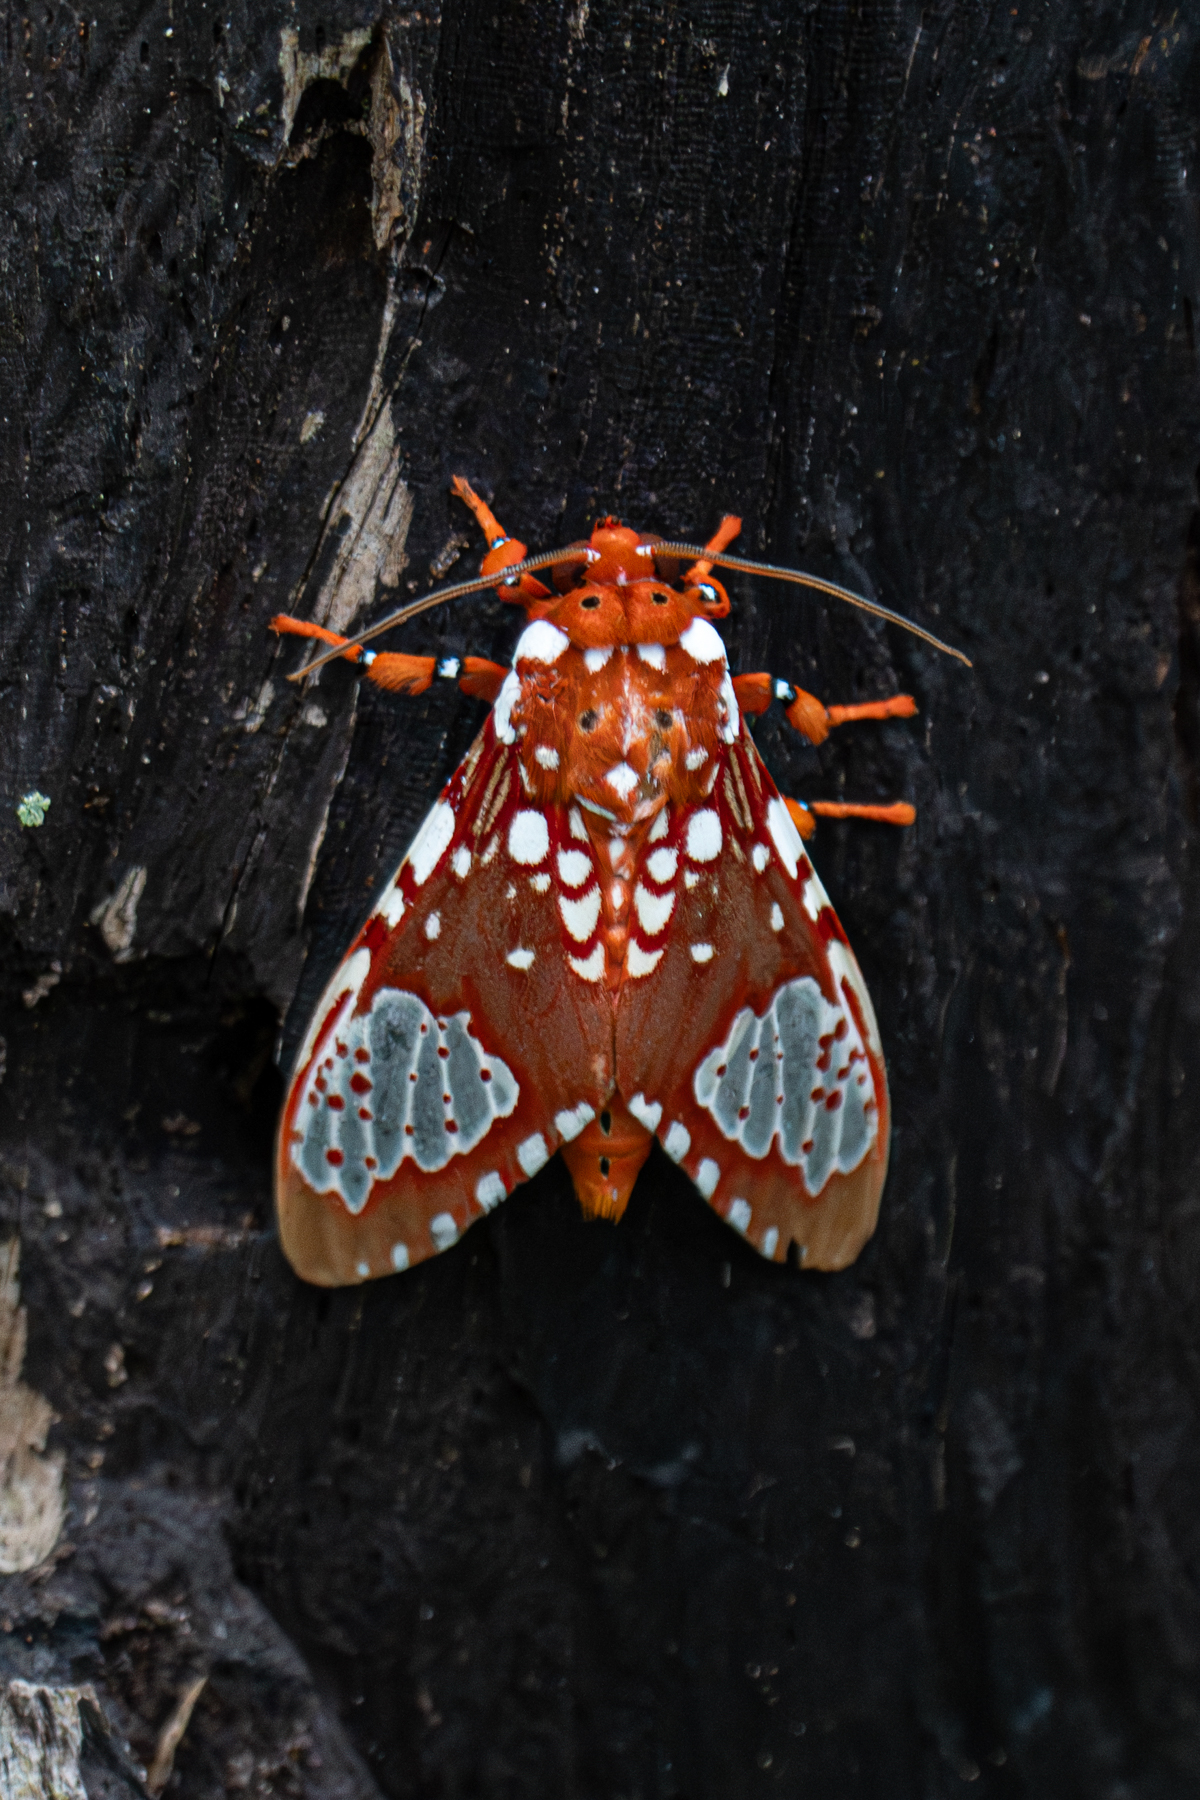 Ripha Flammans Moth is just one of many stunning moths in Costa Rica's lowland rainforests (image by Inger Vandyke)